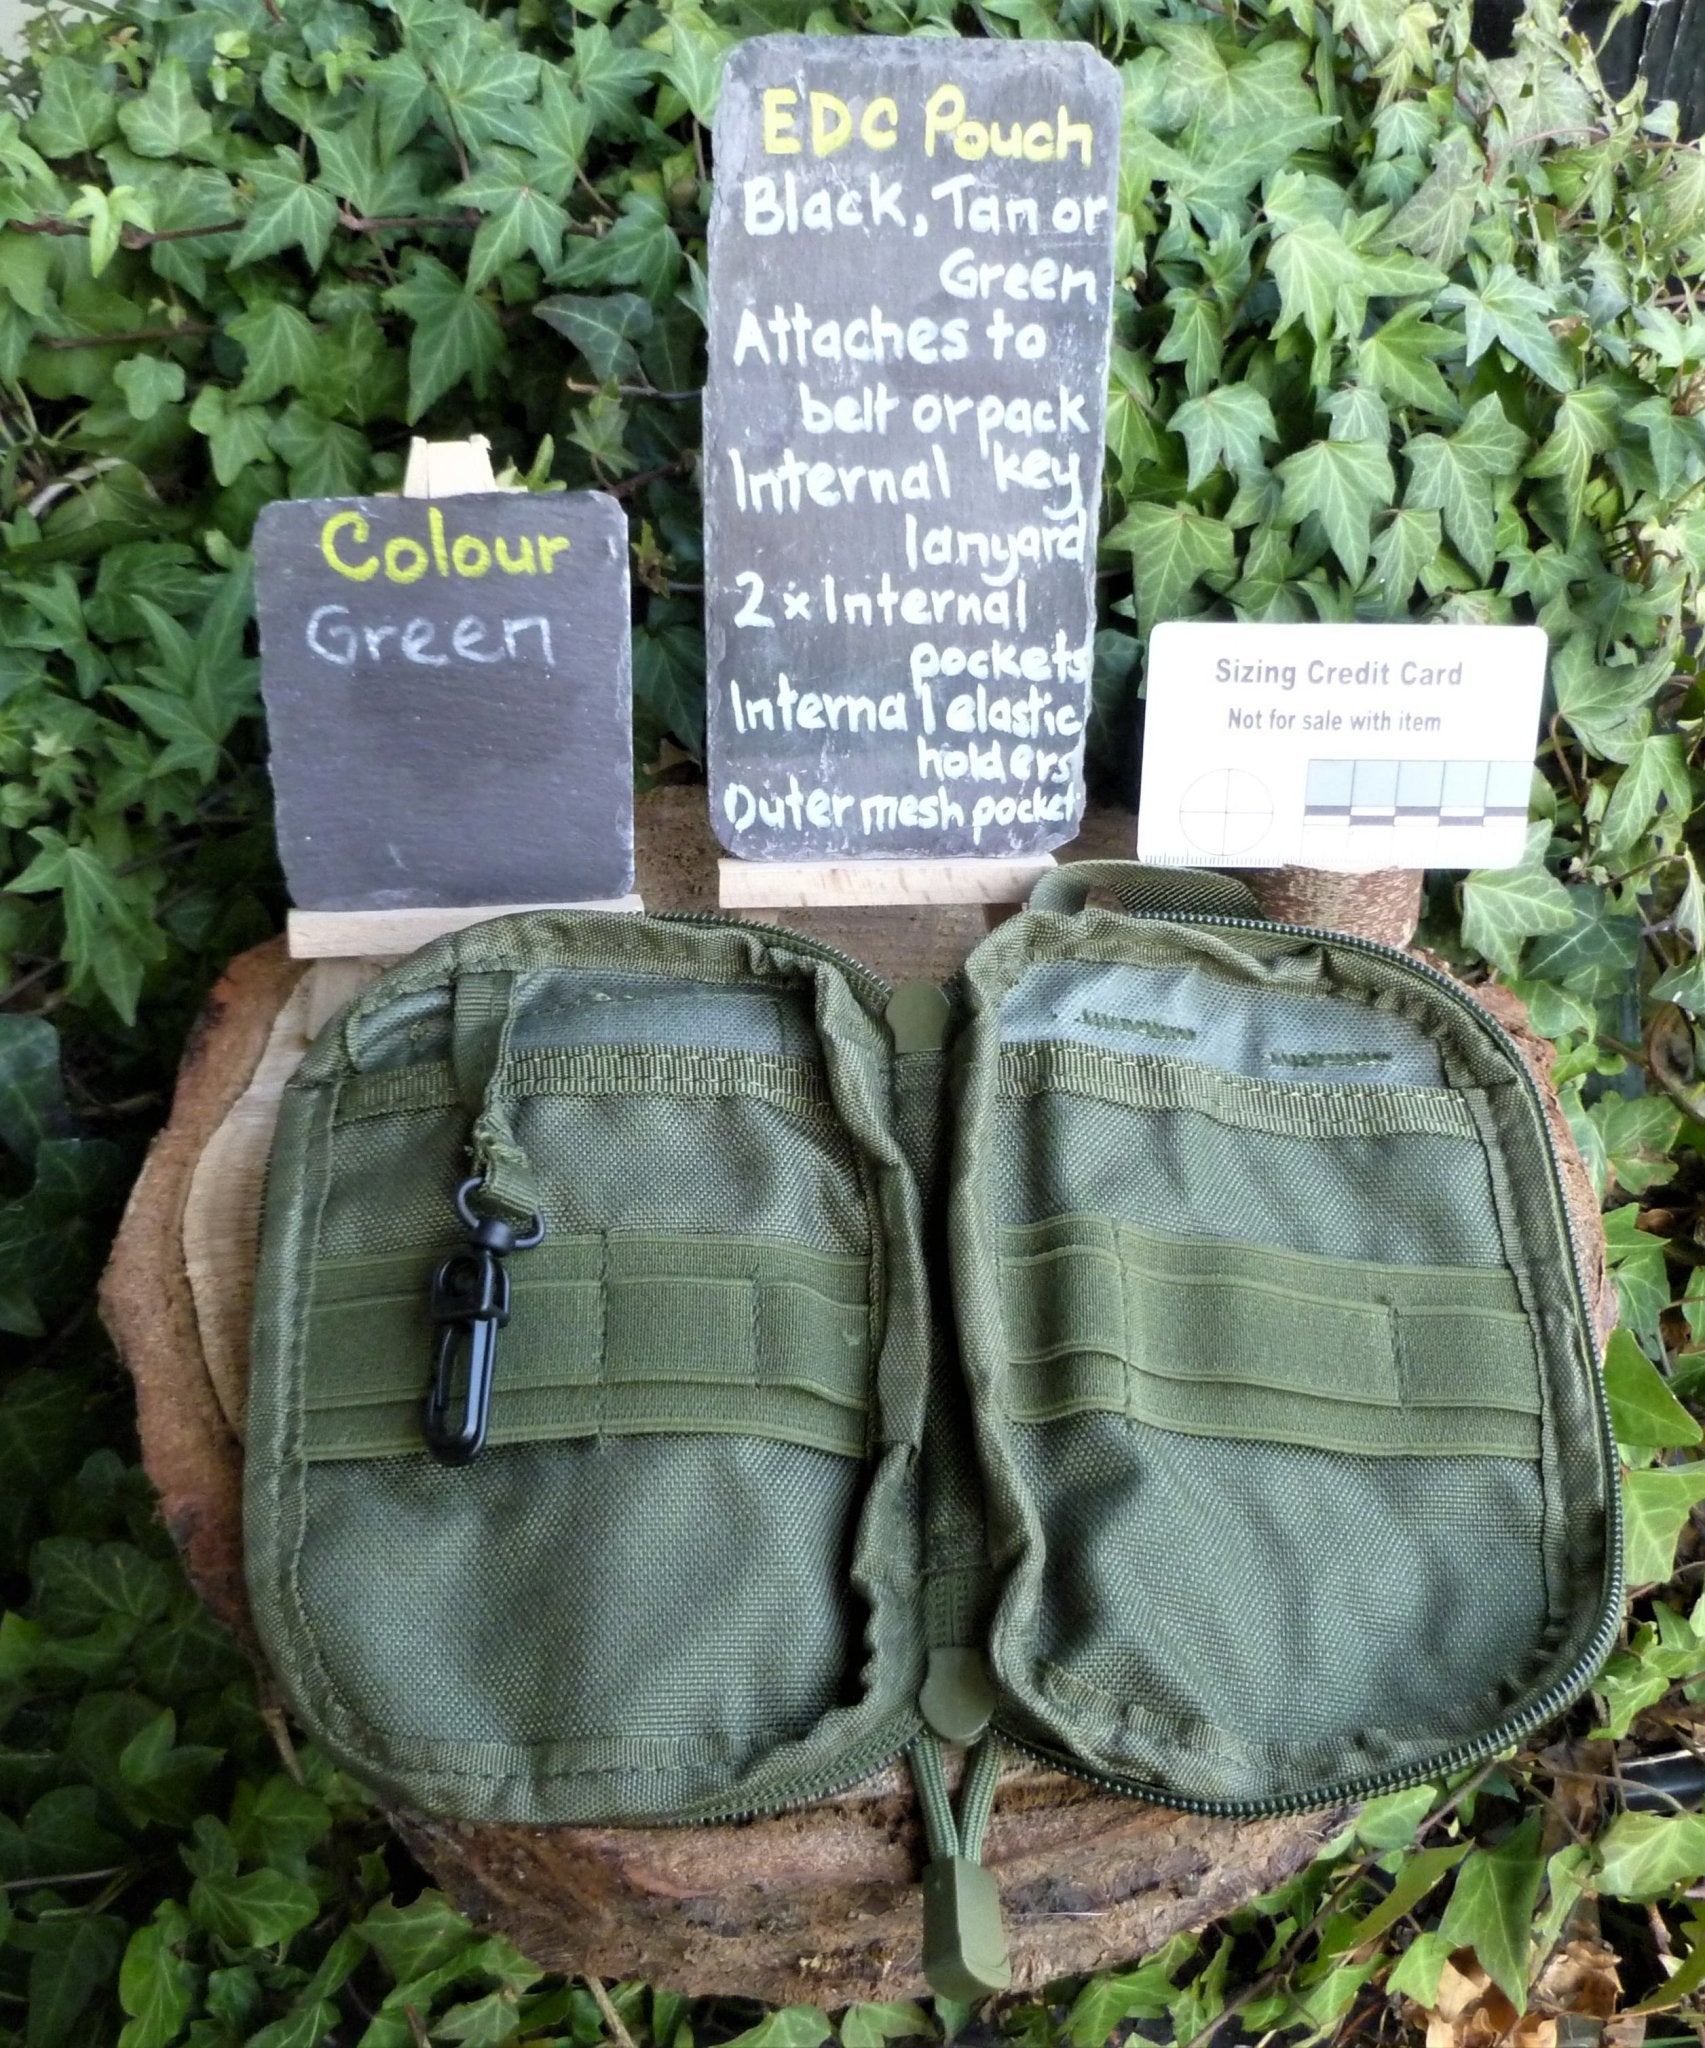 Molle EDC Pouches (Modular Lightweight Load-carrying Equipment system) Pouche Huggins Attic Green   [Huggins attic]